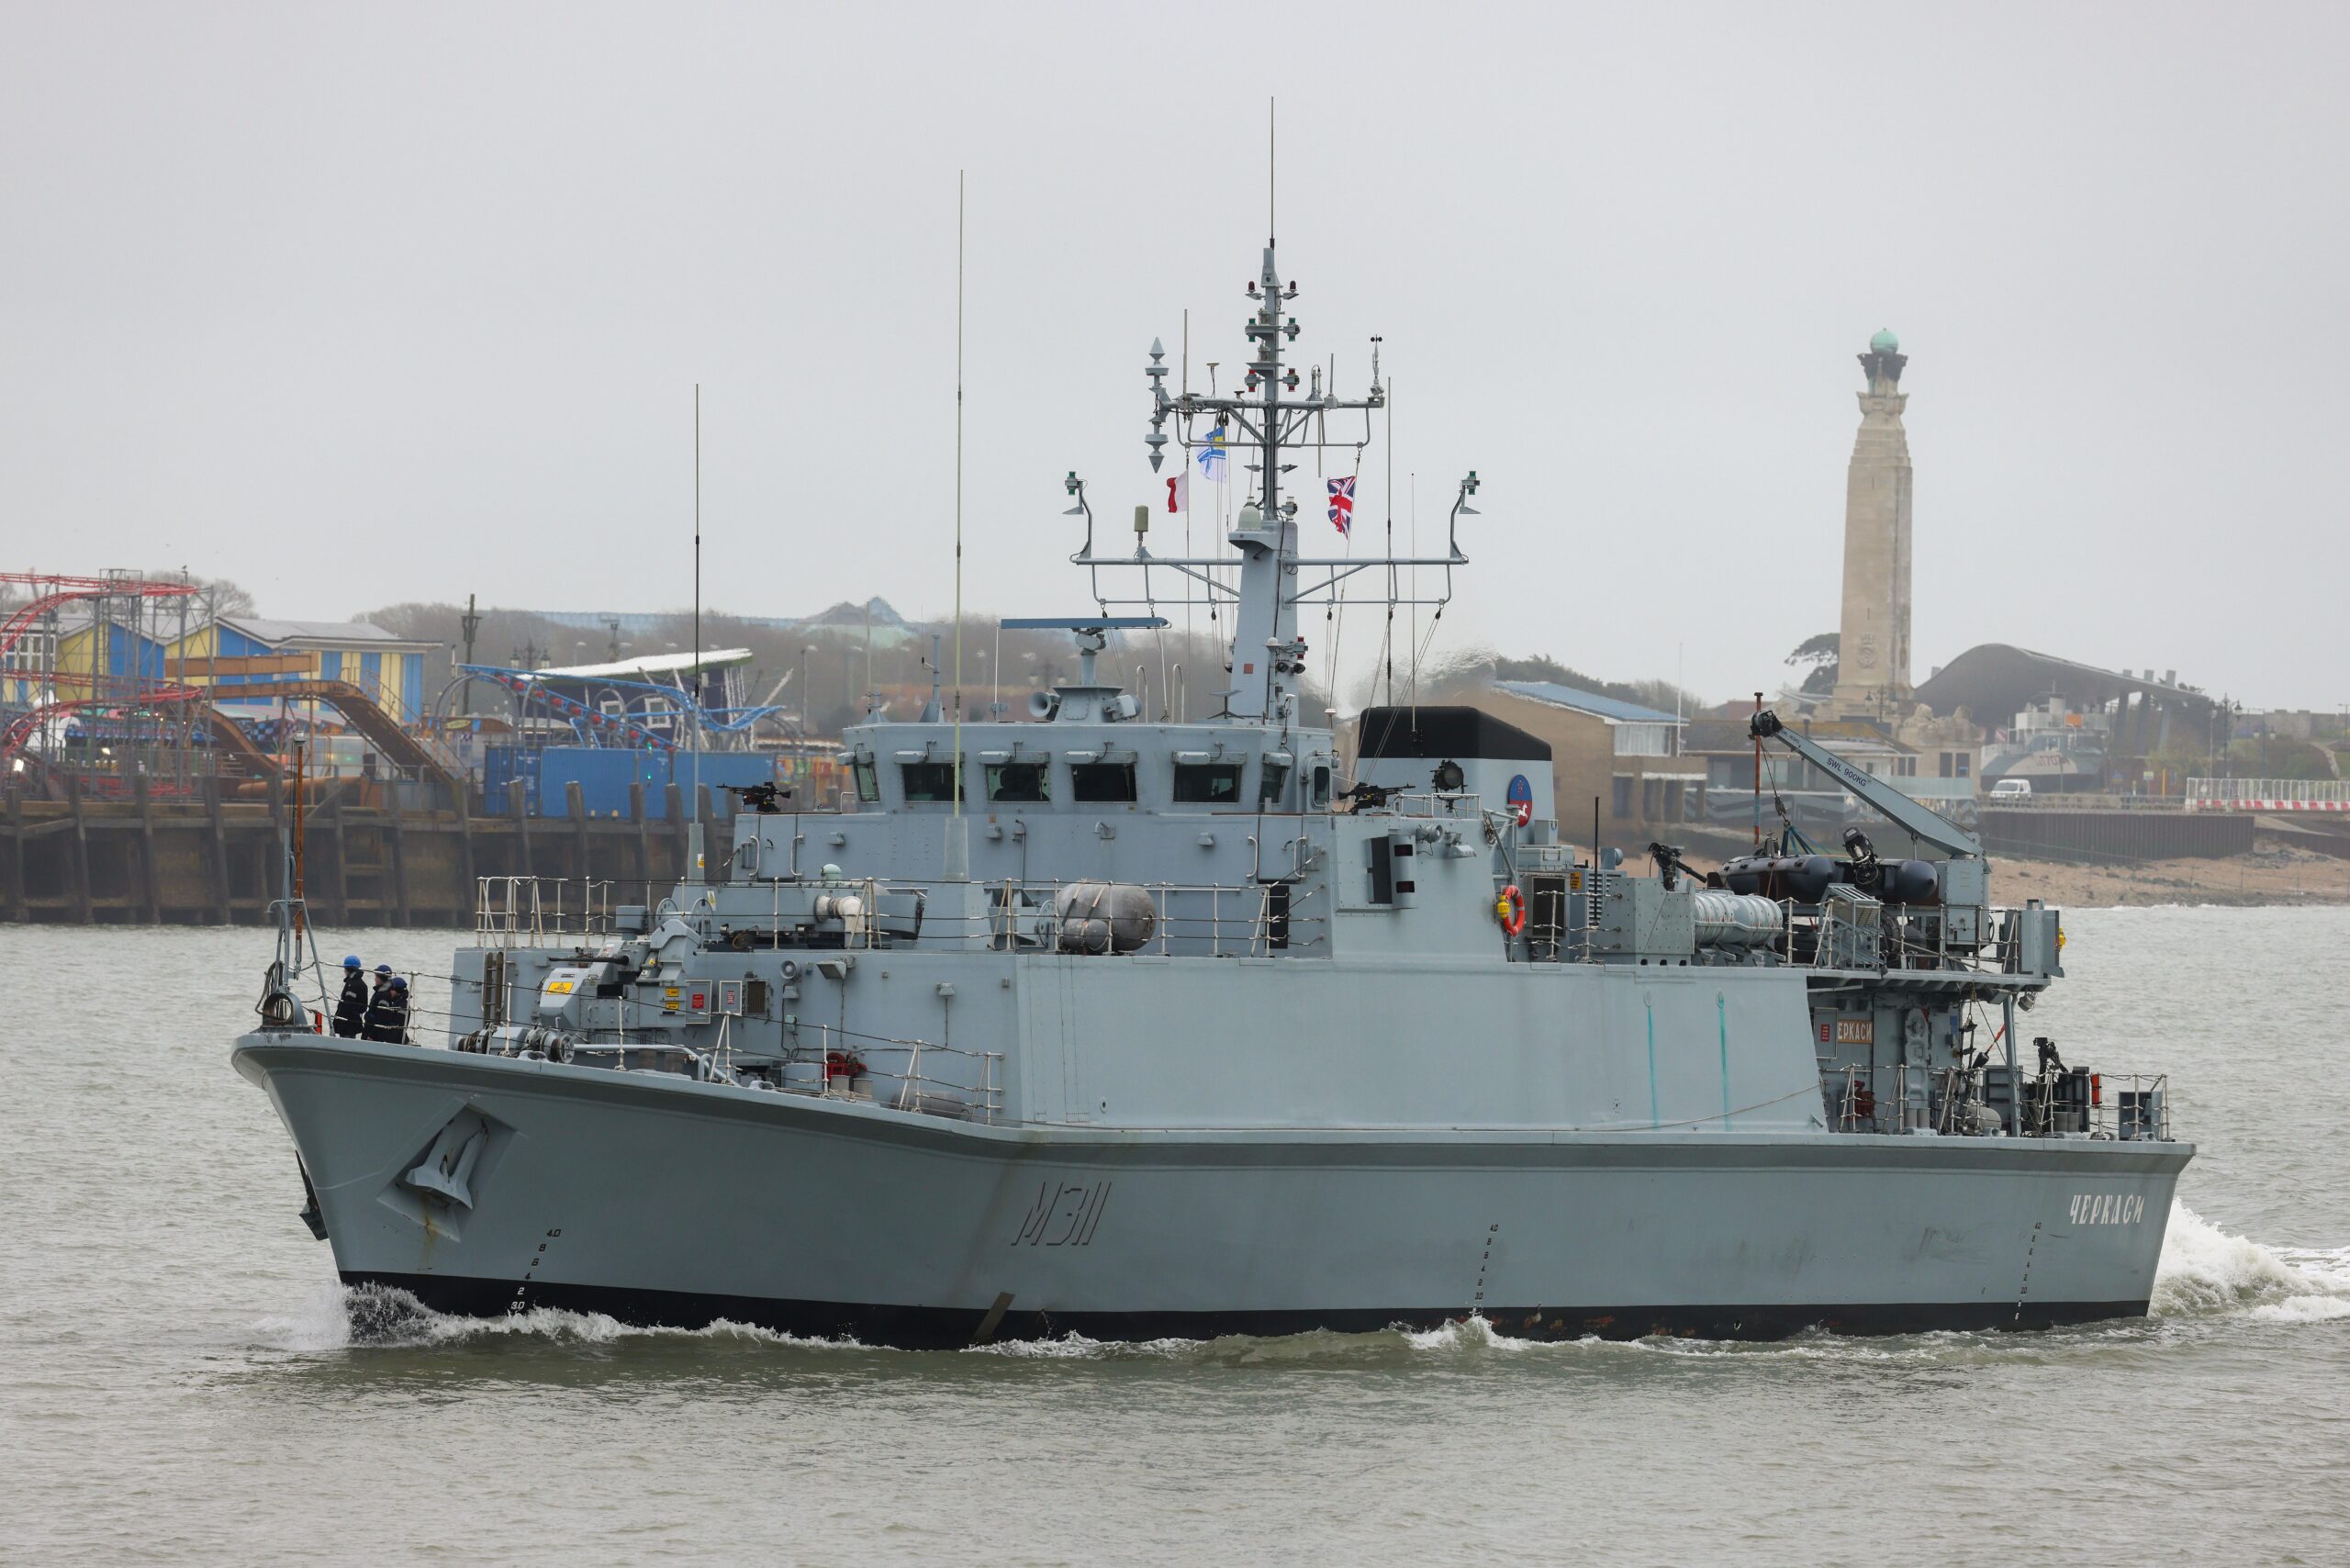 Two Ukrainian Navy ships to be temporarily based in Portsmouth